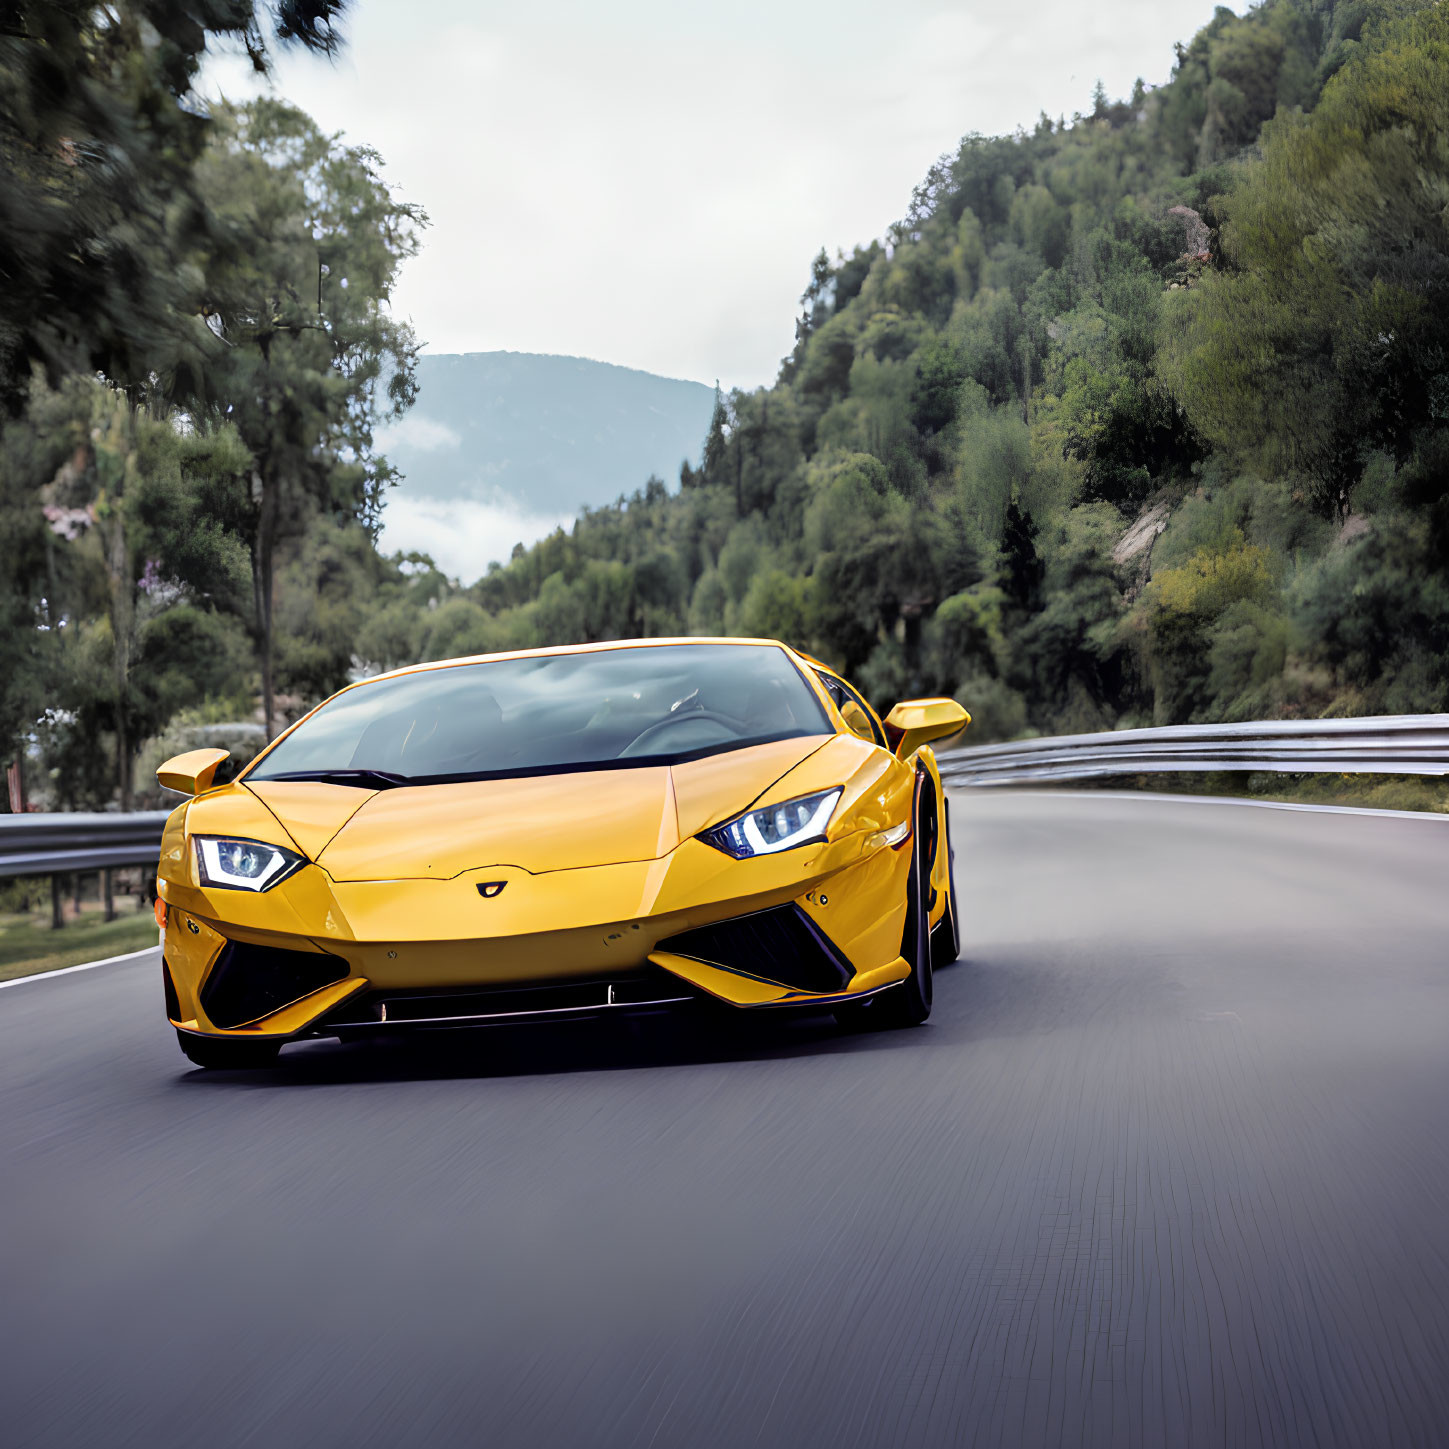 Yellow Lamborghini on Mountain Road with Trees and Cloudy Sky